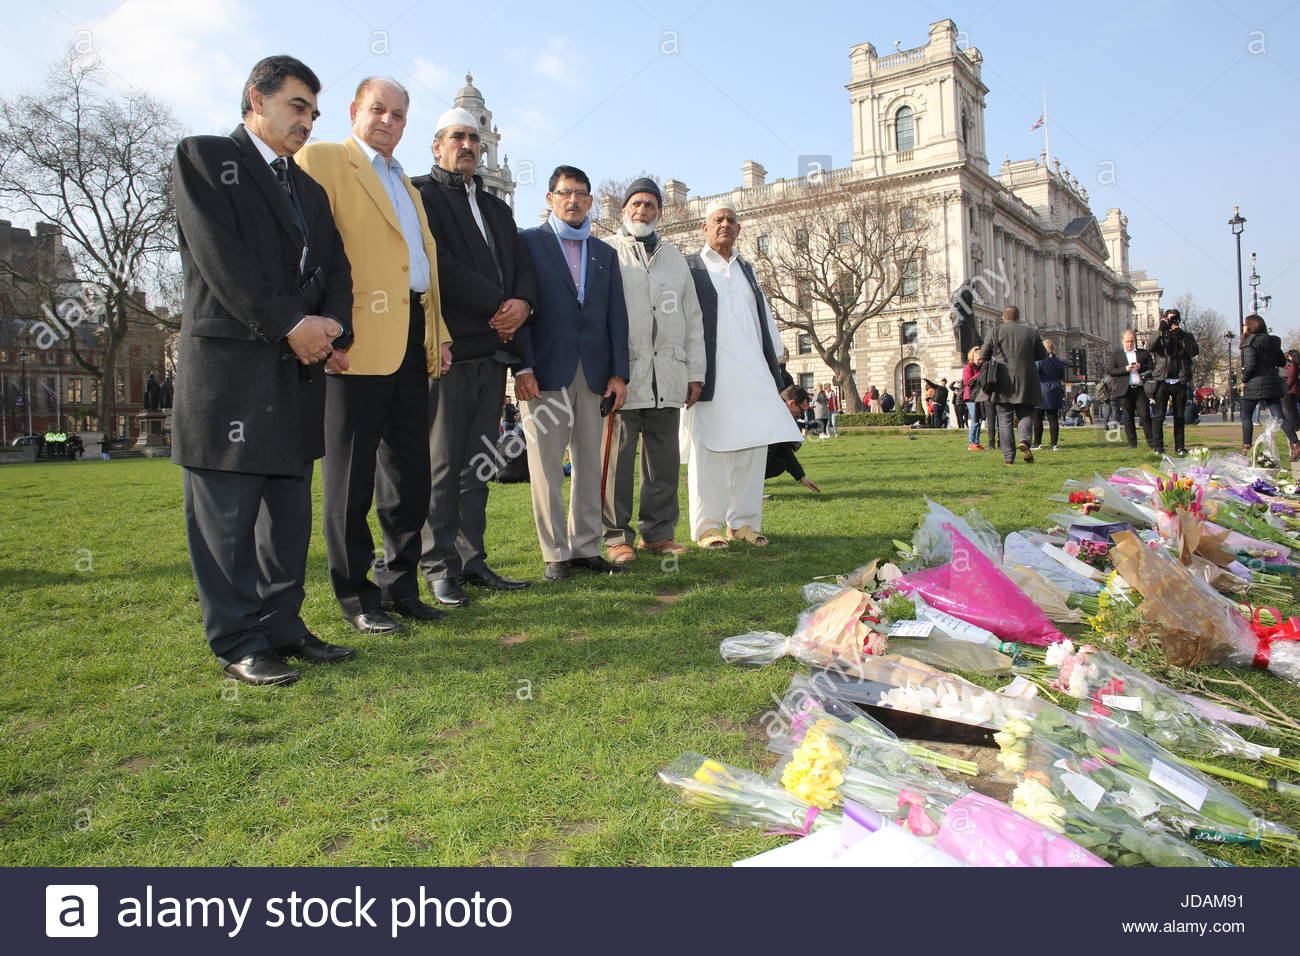 At a floral tribute to the victims of the London Brdige attack leaders from the Muslim community pay their respects to those killed and injured. Stock Photo